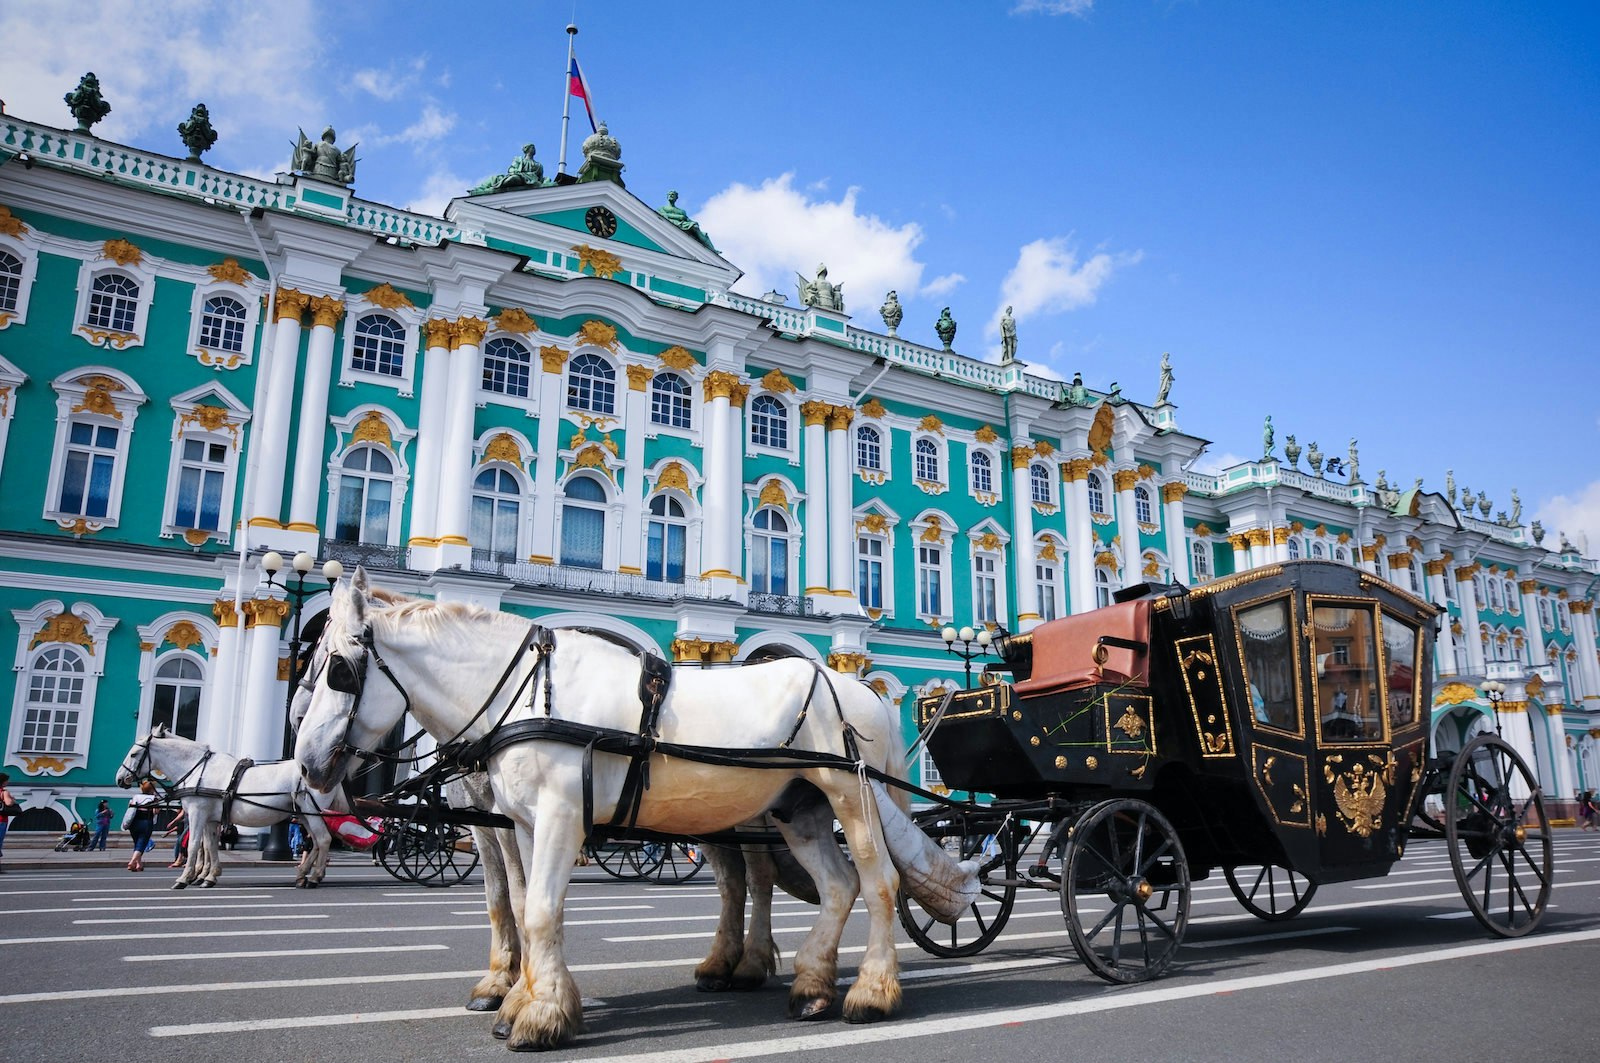 A carriage pulled by horses near the State Hermitage Museum during the summer.